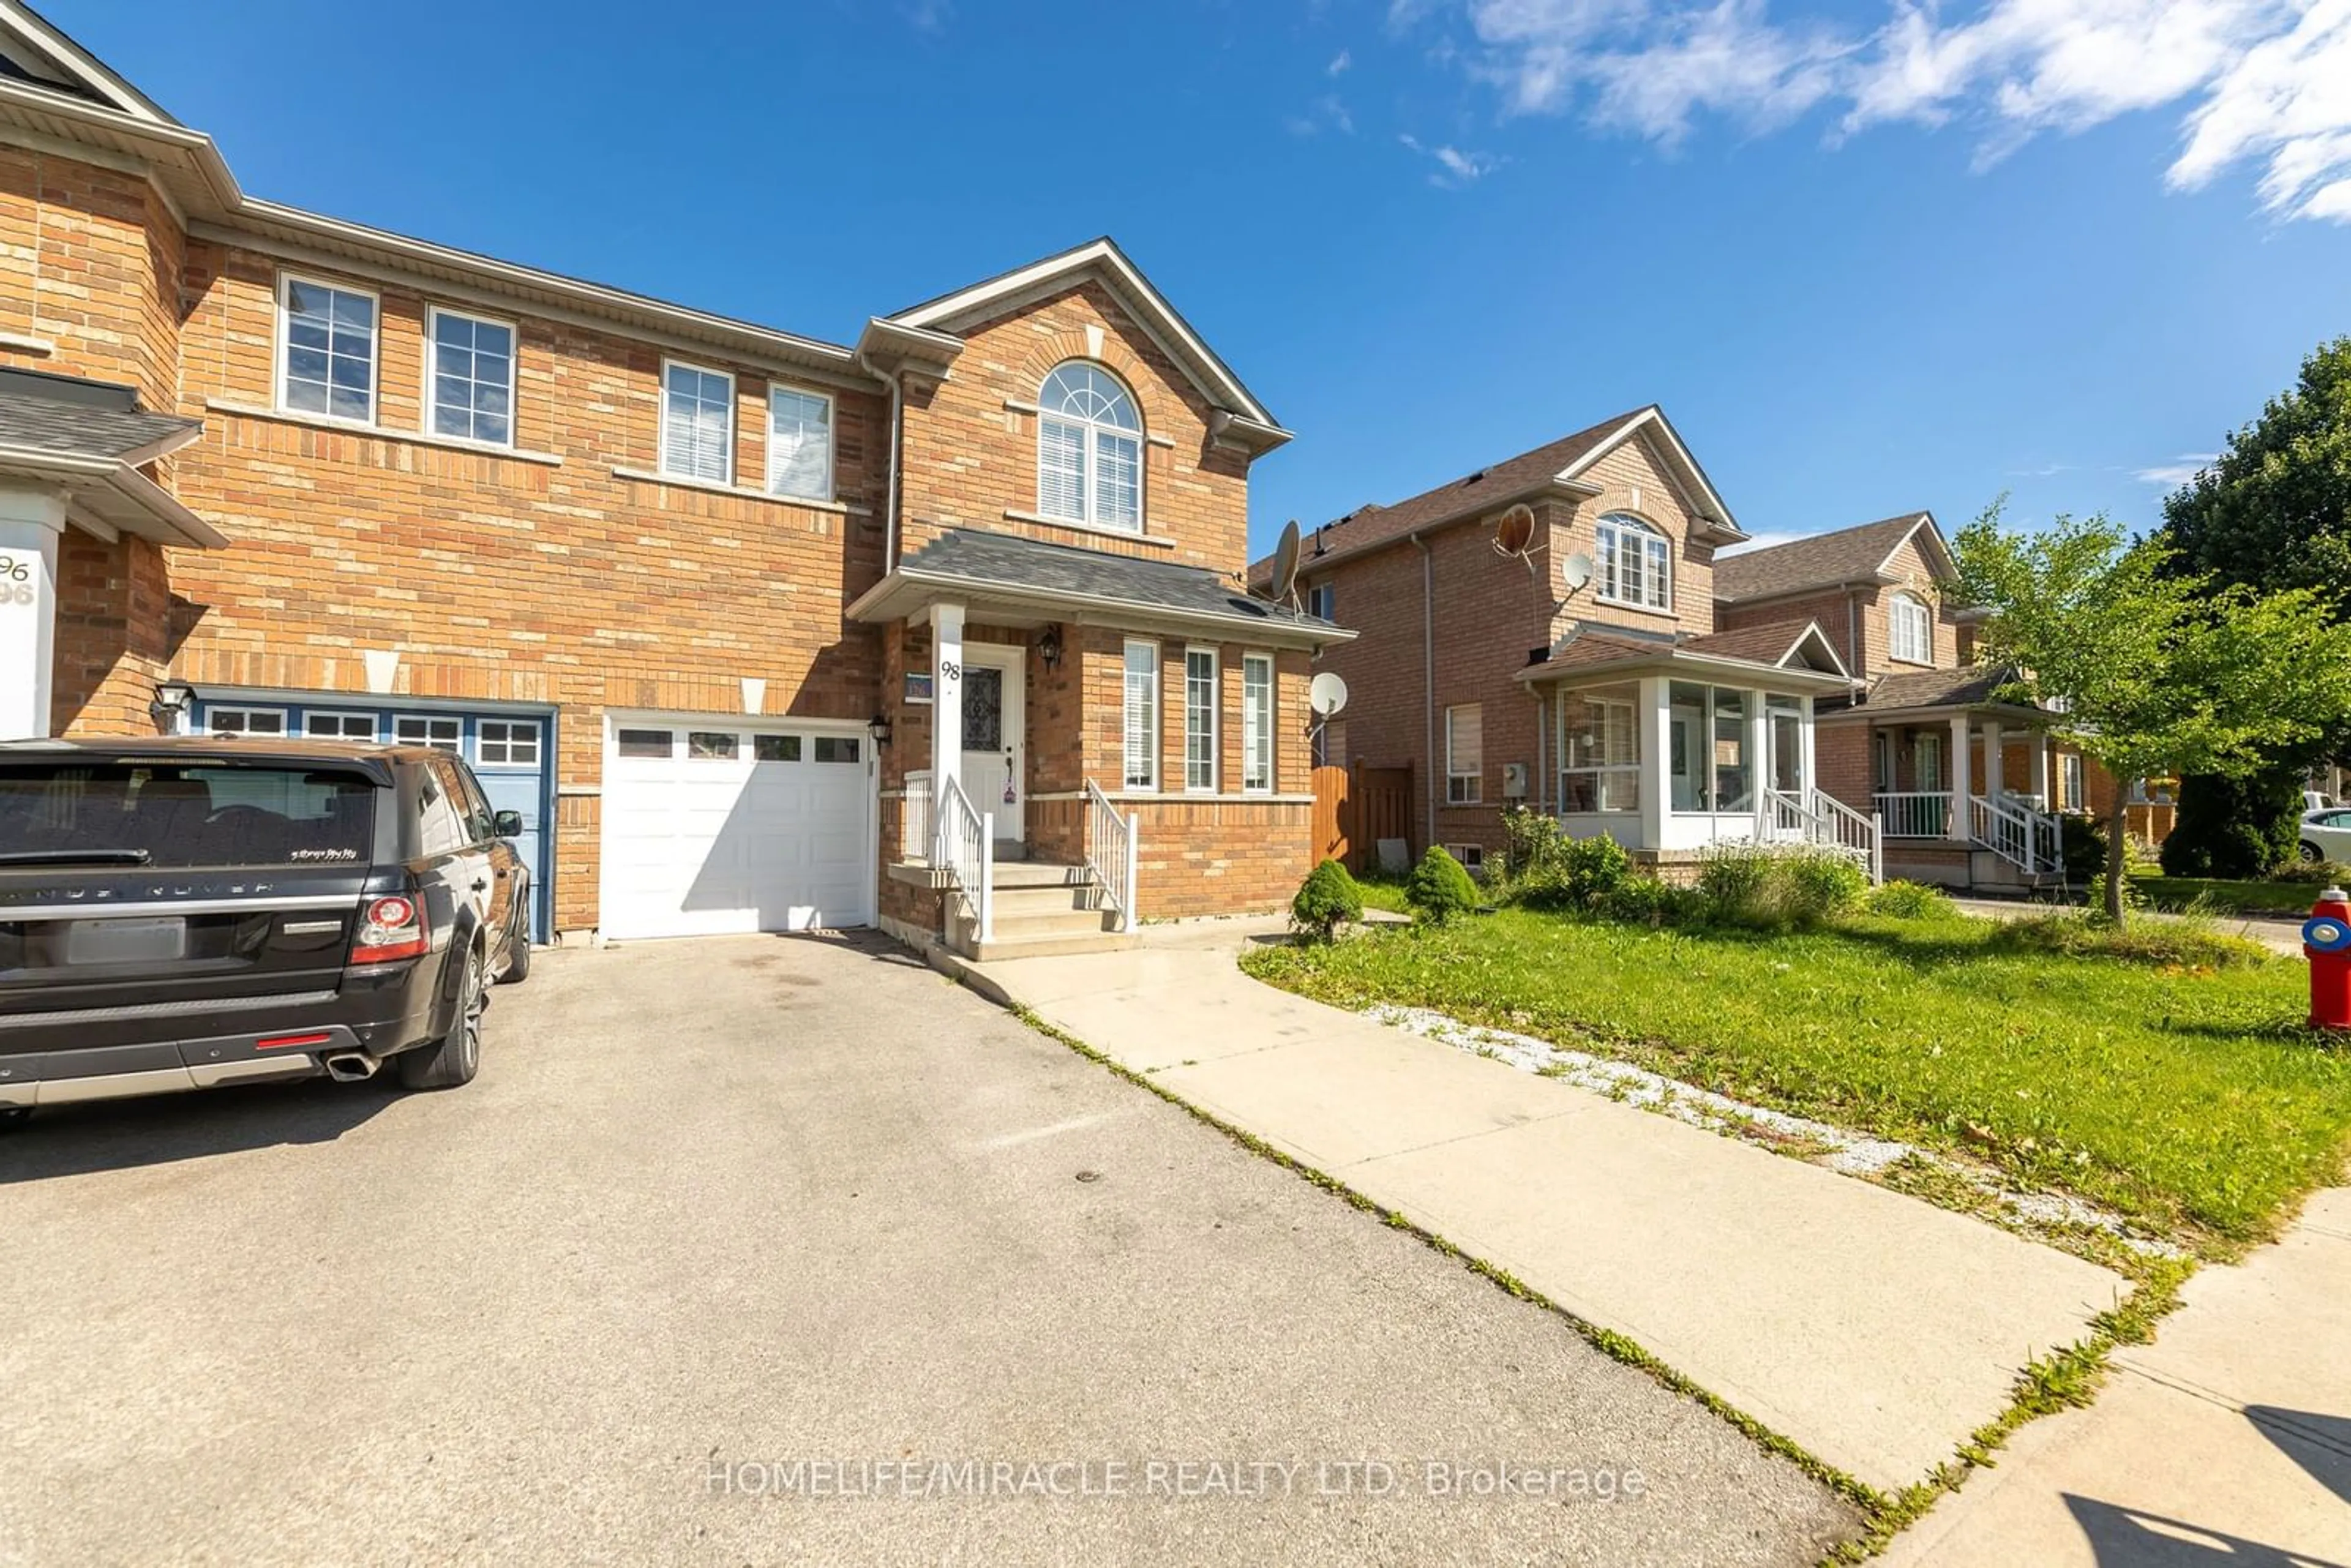 Frontside or backside of a home for 98 Starhill Cres, Brampton Ontario L6R 2W1